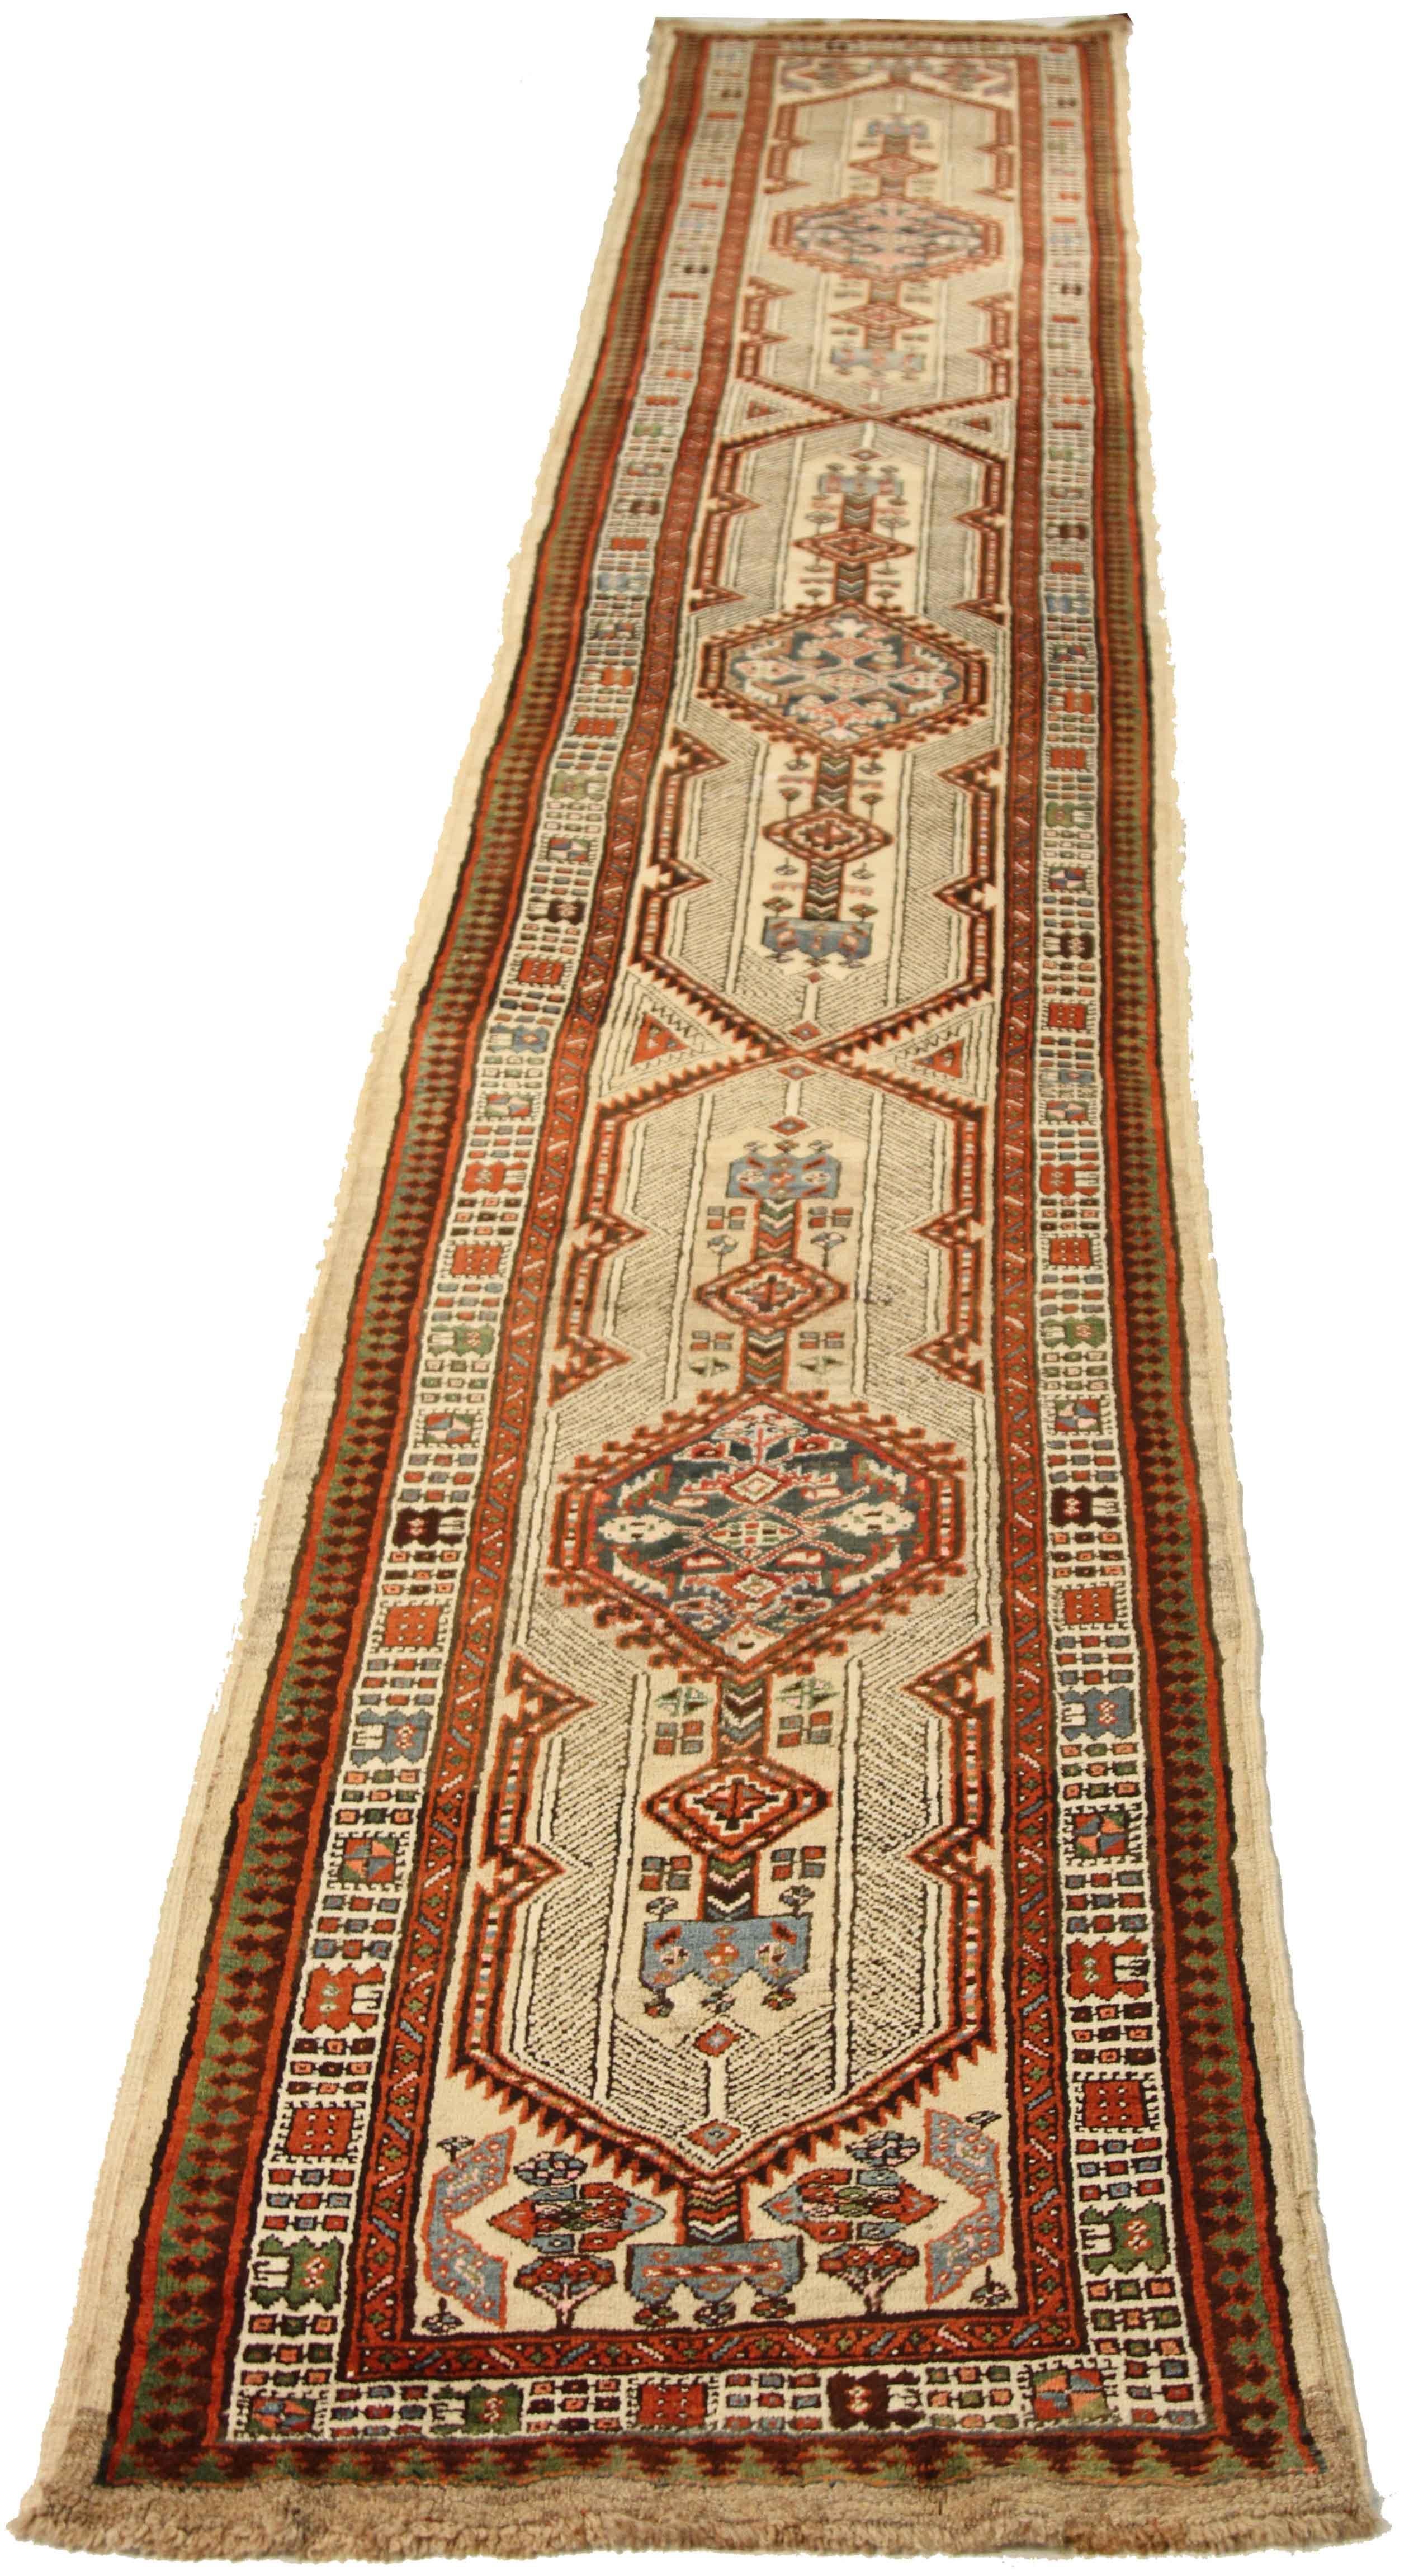 Geometric patterns infused with a tribal color motif make this antique Persian rug desirable for any space. Its foundation is made from the finest quality wool which has allowed it to keep its pristine condition despite being close to a century old.